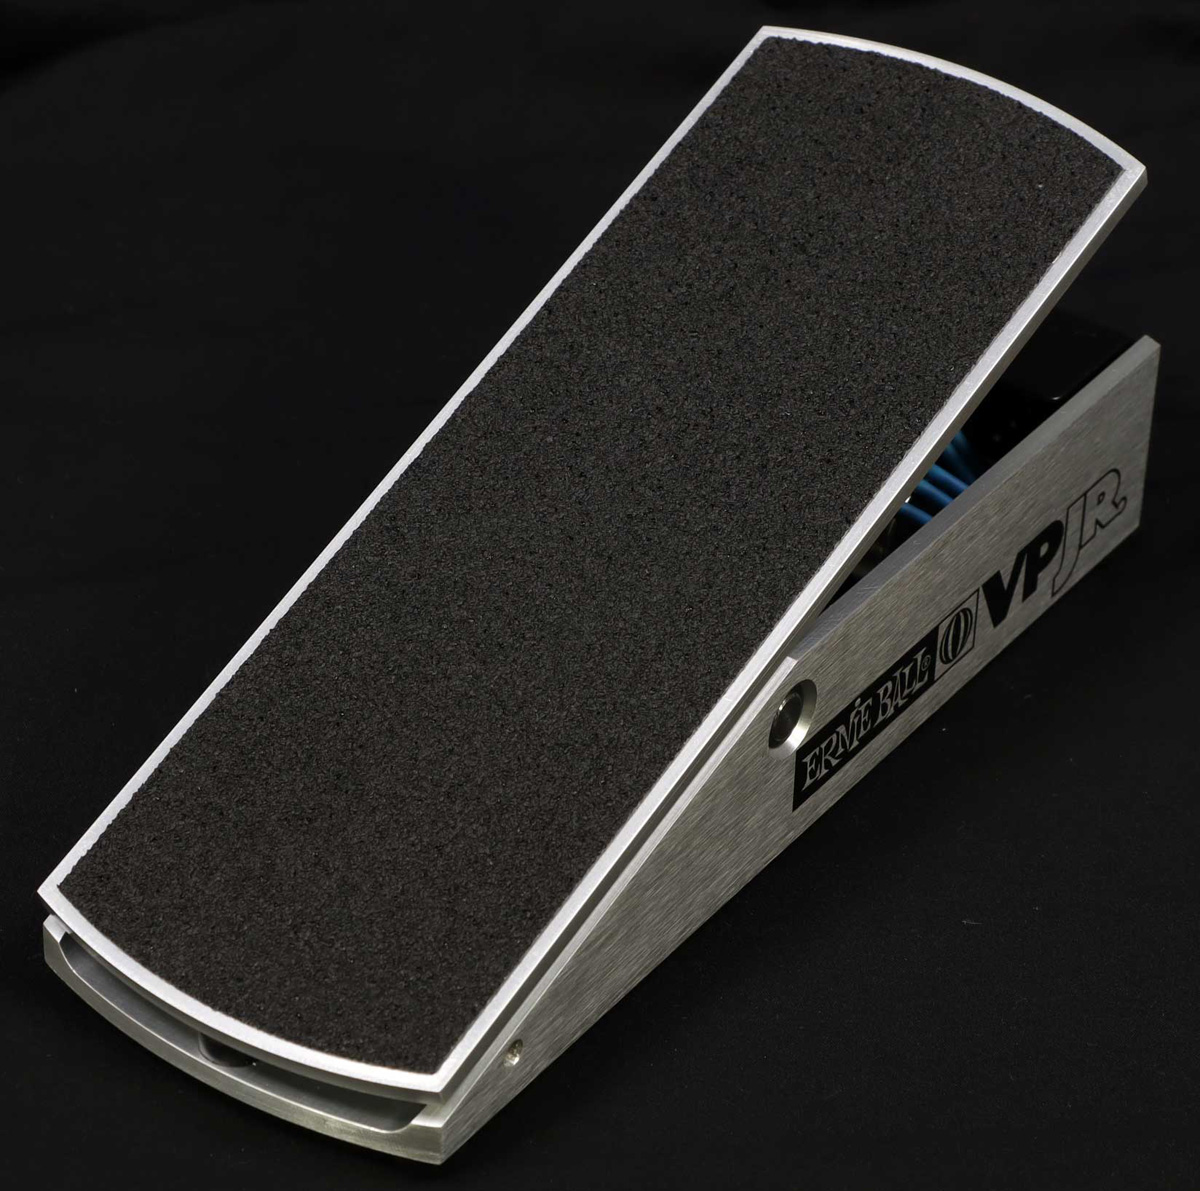 KarDiaN Volume Pedal KND-LOW for BASS